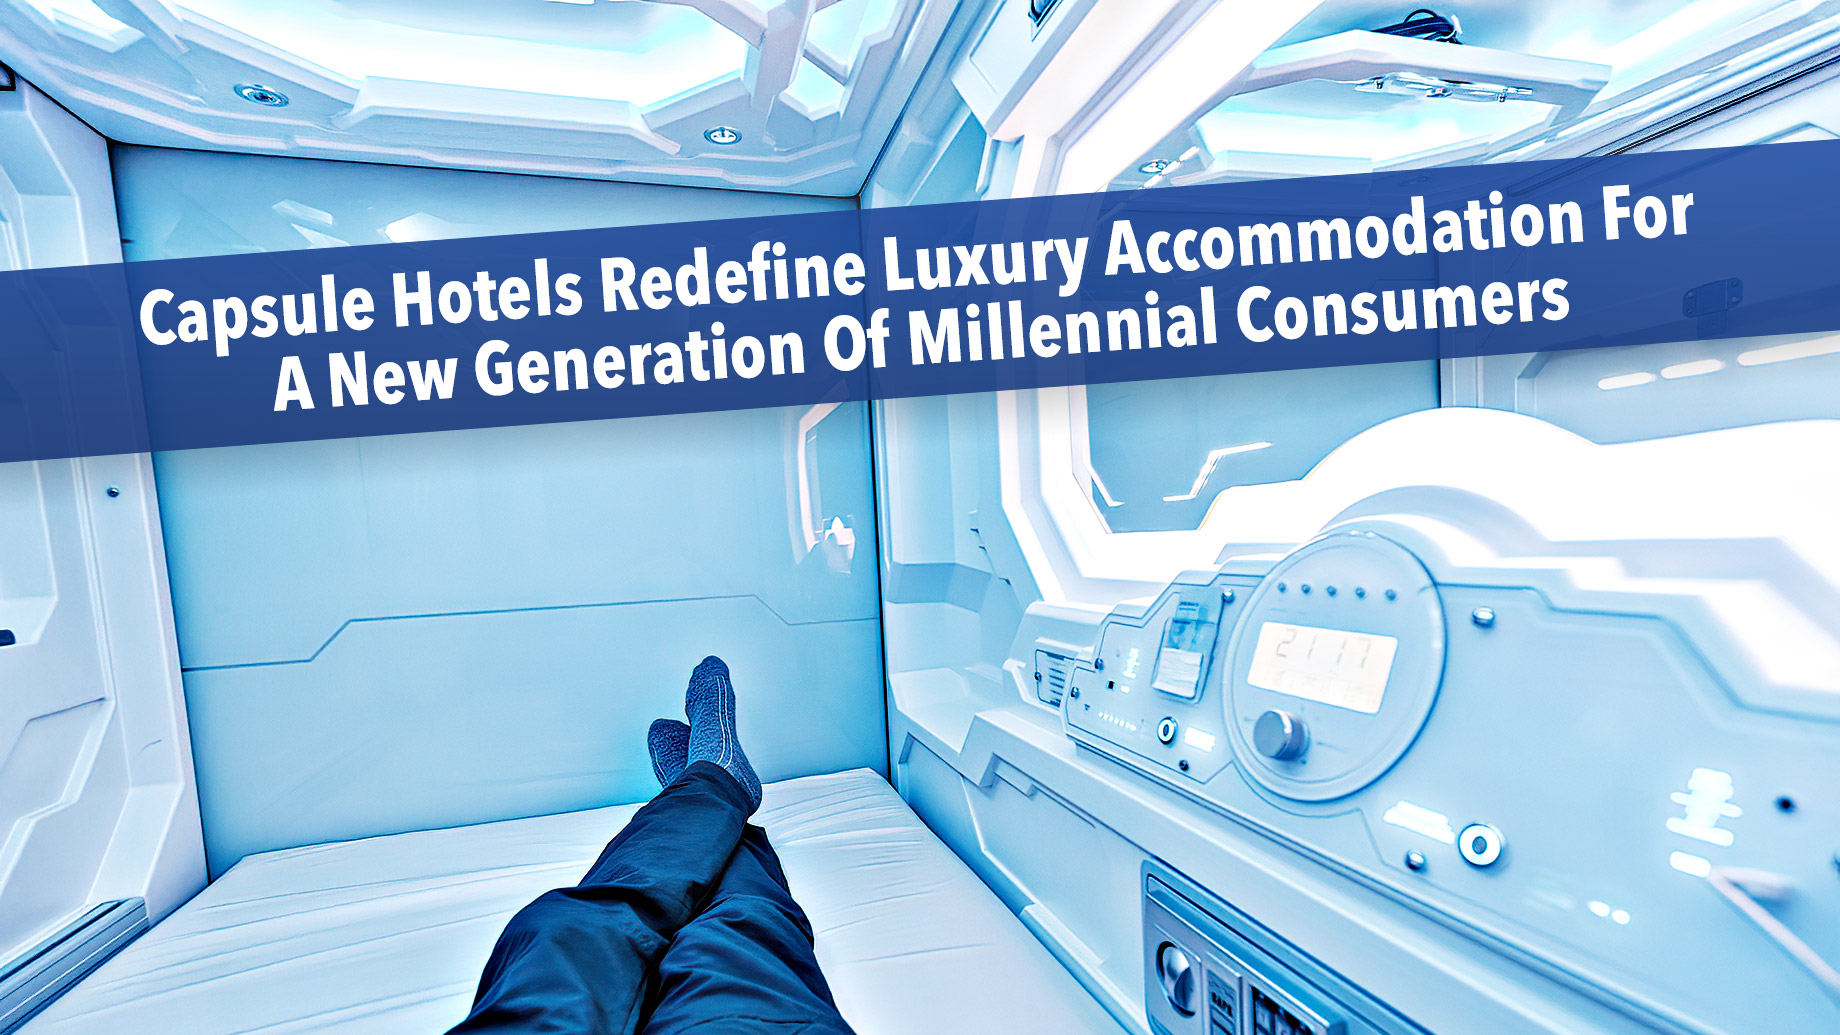 Capsule Hotels Redefine Luxury Accommodation For A New Generation Of Millennial Consumers